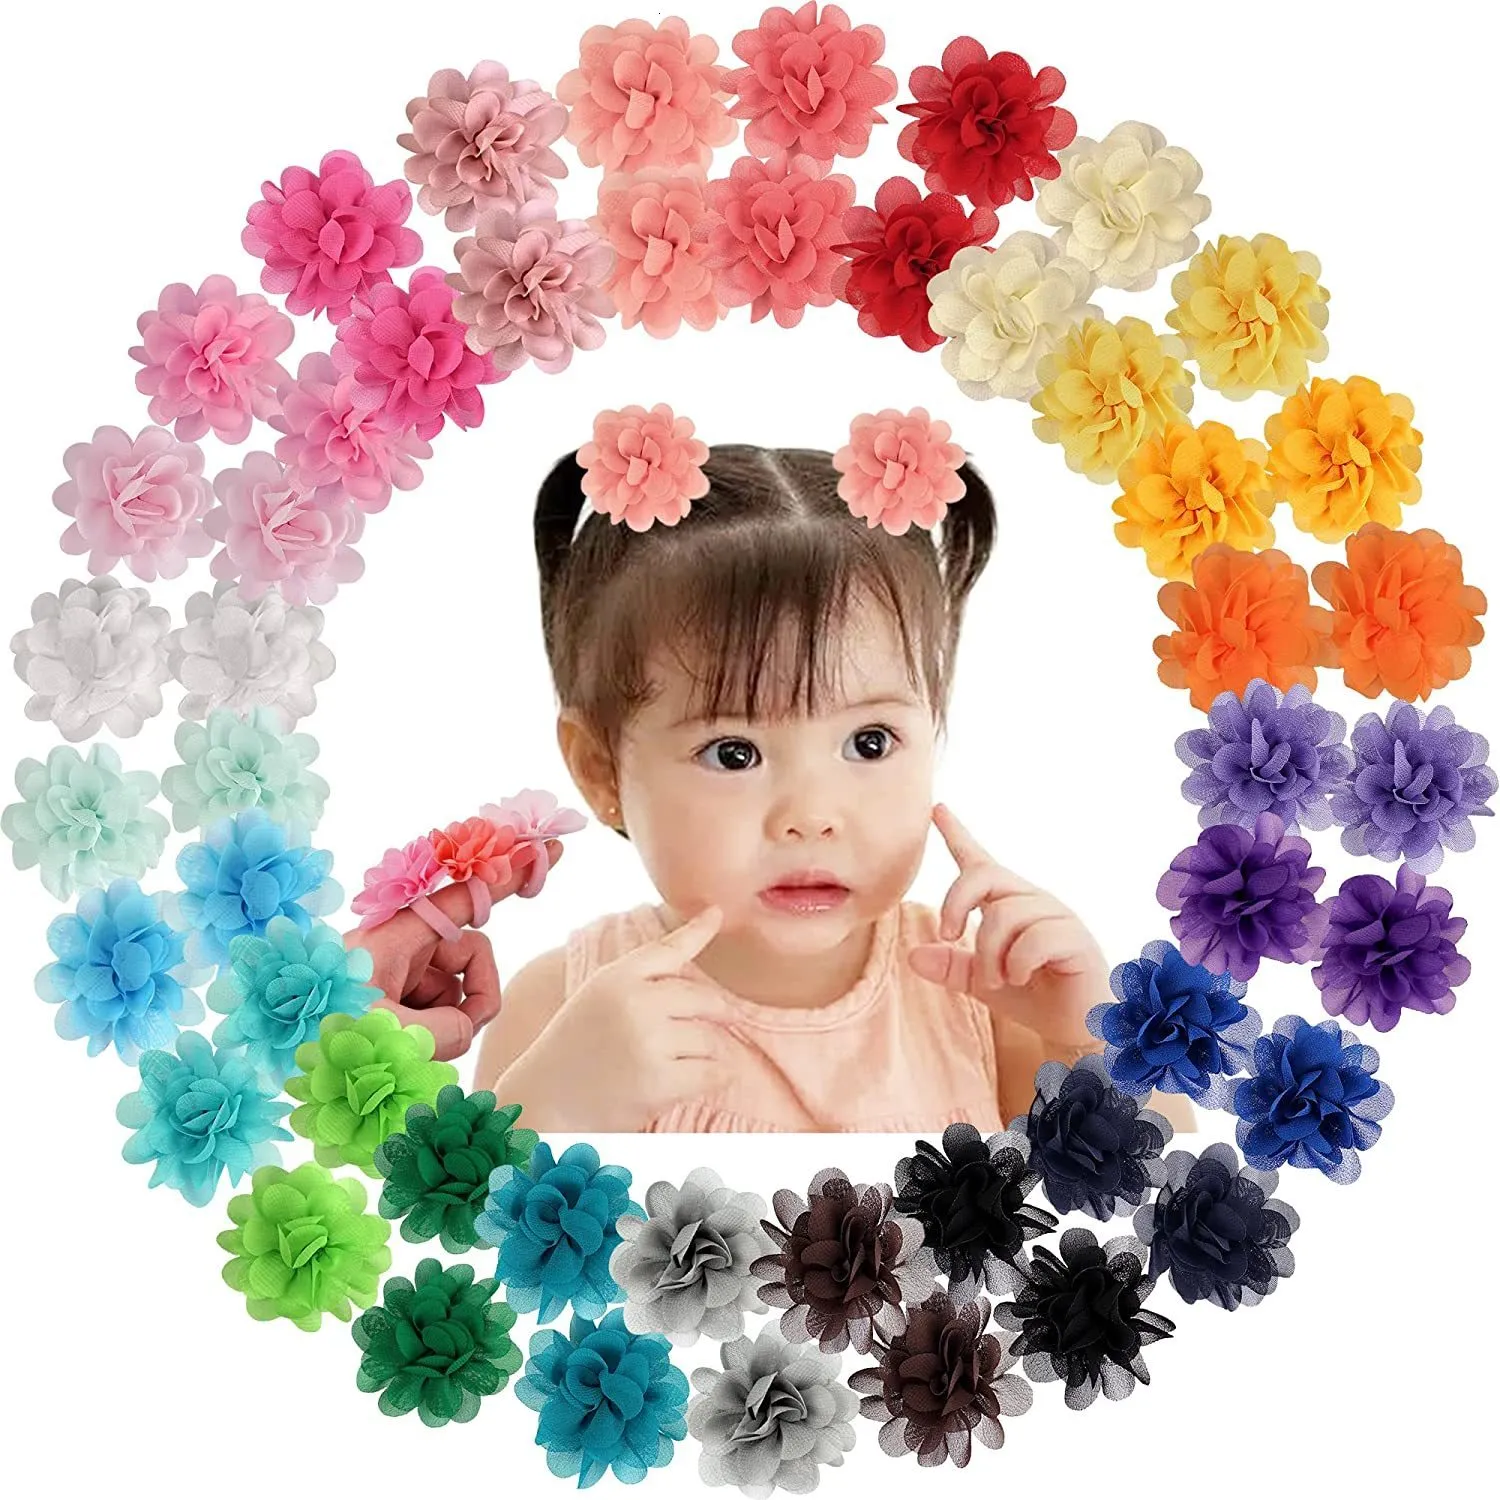 Hair Rubber Bands 50PCS 25 Pairs Baby Girls Ties 2inch Chiffon Flower Bows Soft Elastics Ponytail Holders 230202